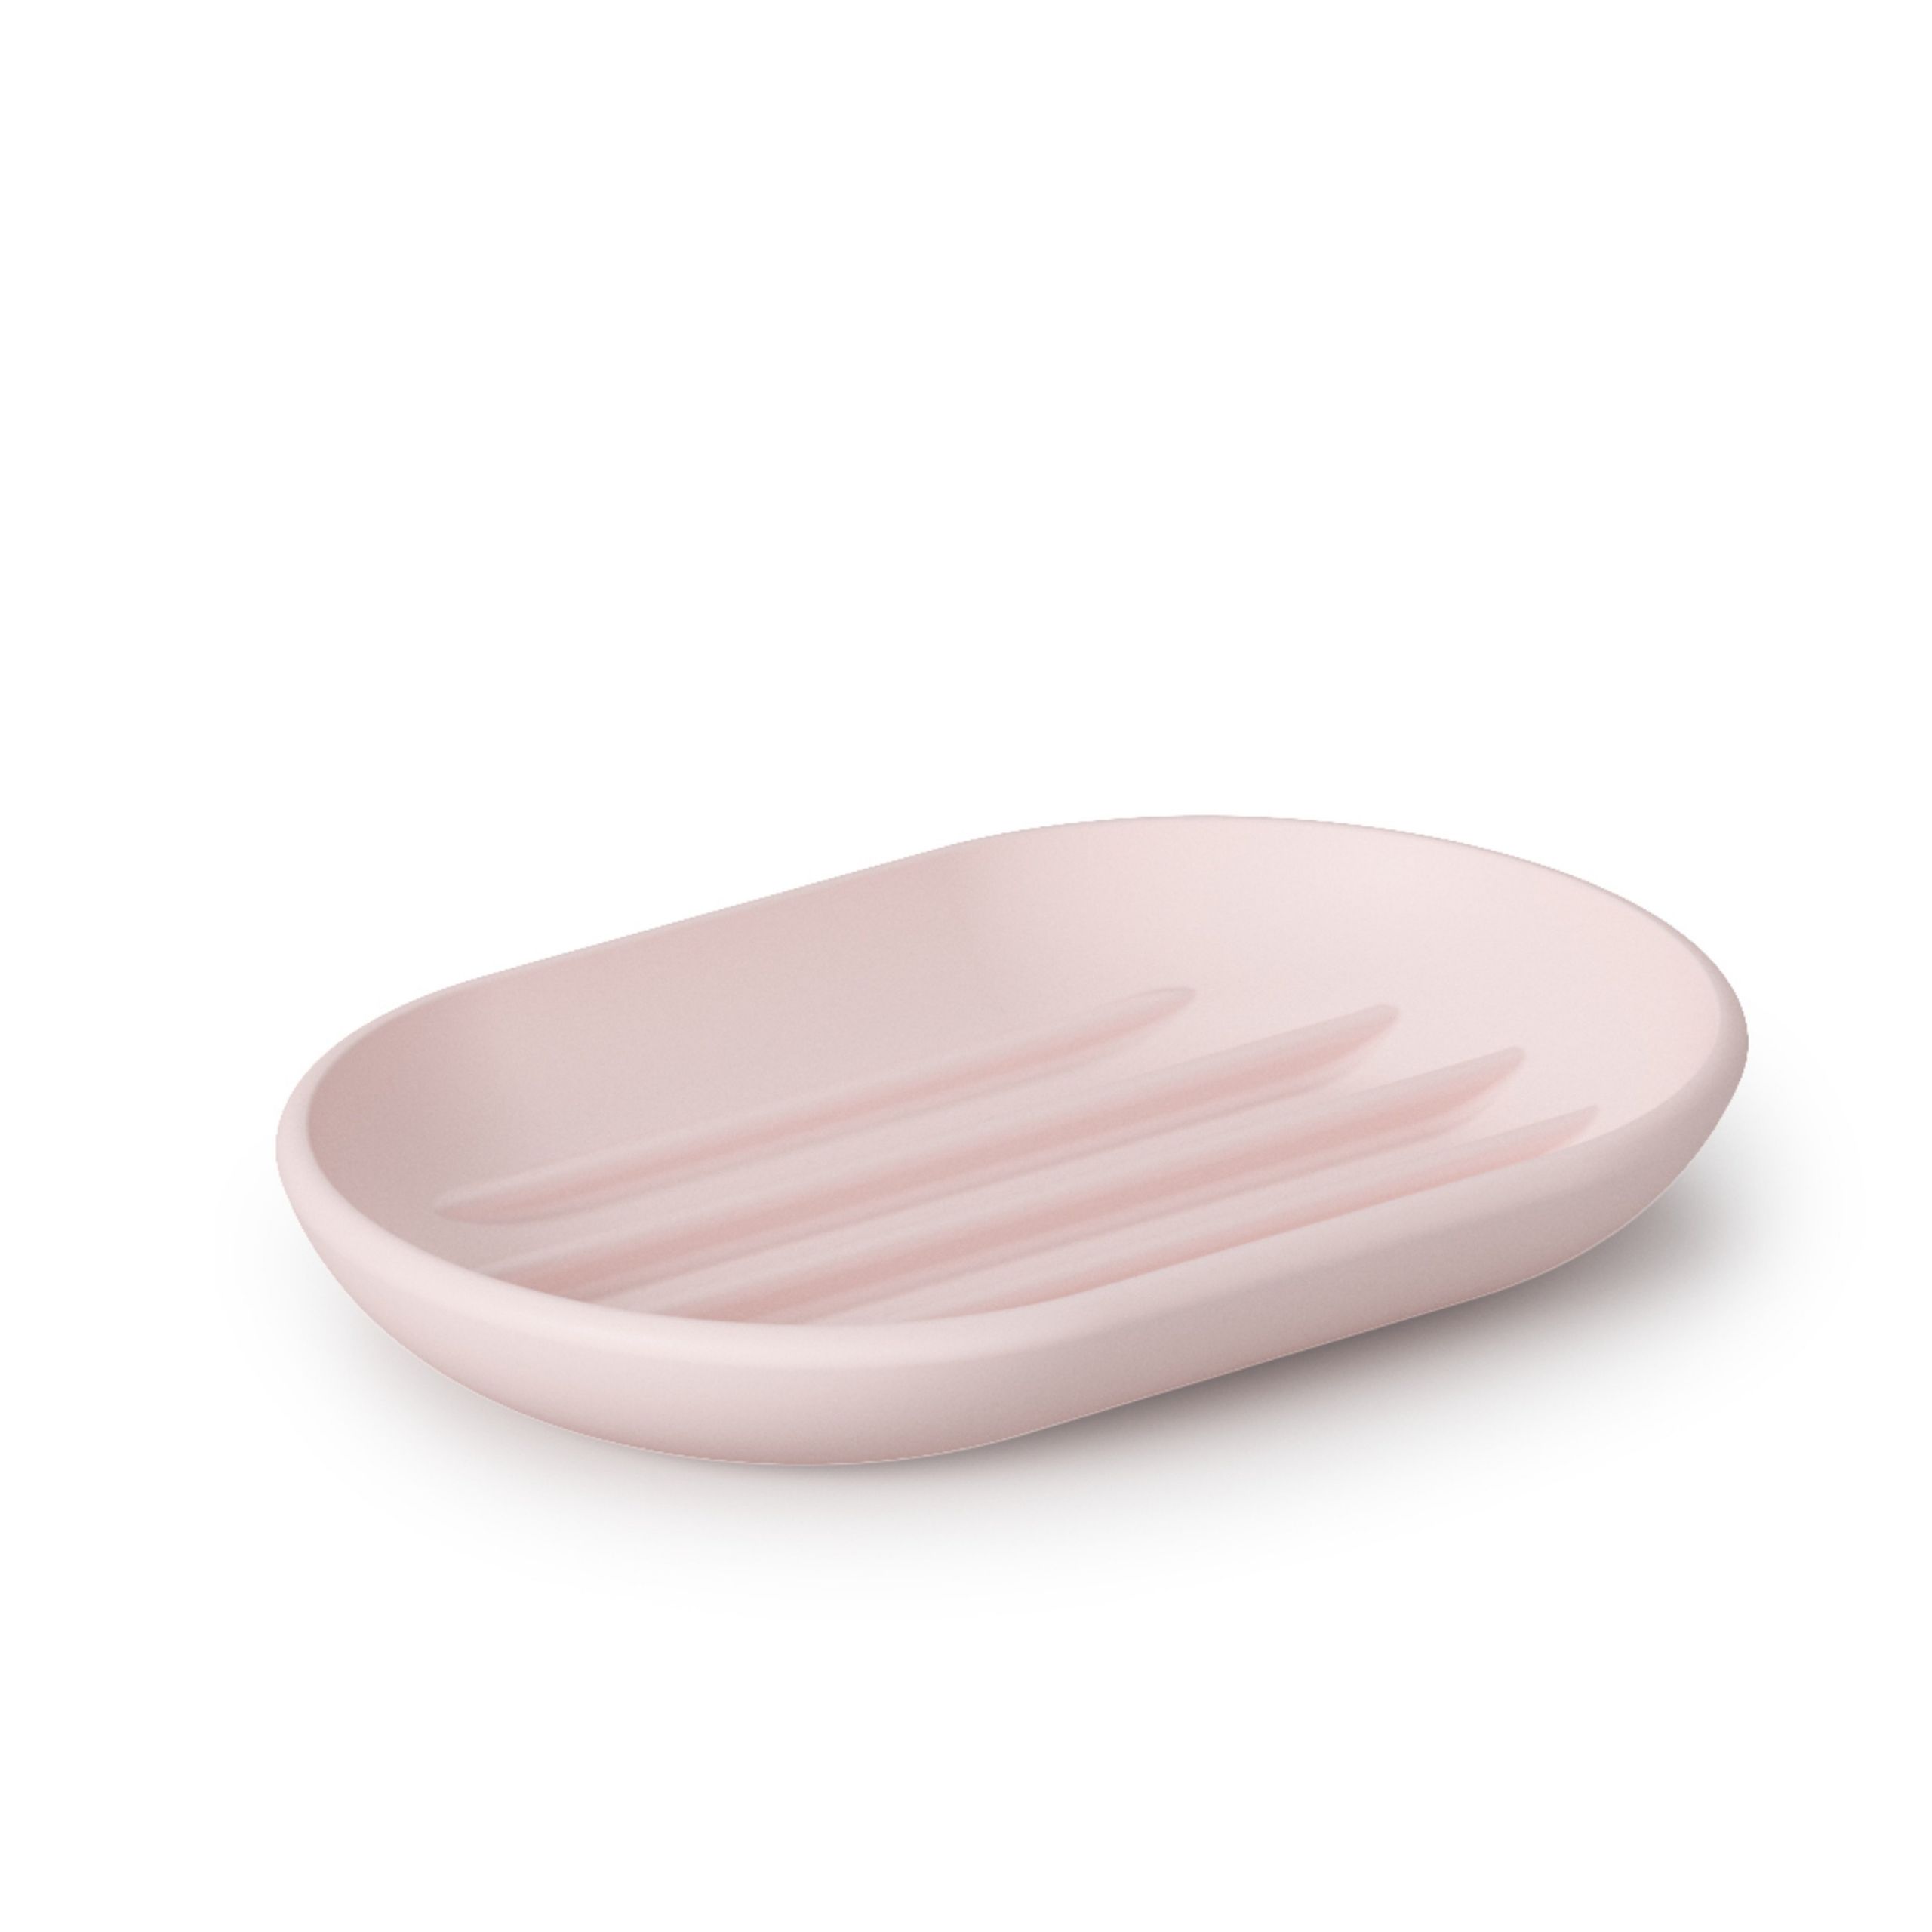 Touch soap dish blush pink